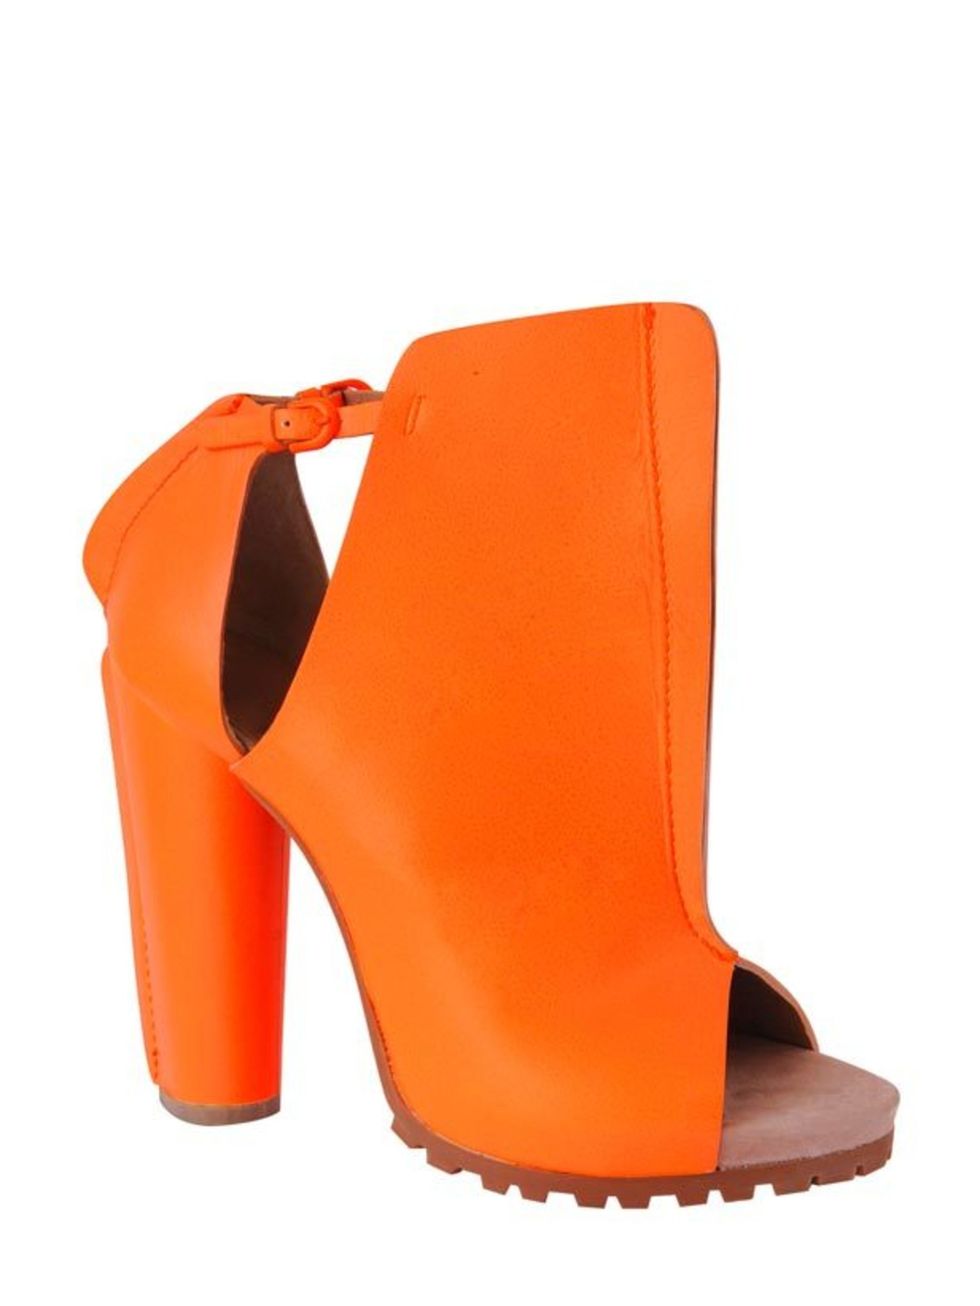 <p>Cacharel orange leather boots, £345, at Harvey Nichols, for stockists call 0207 235 5000 </p>